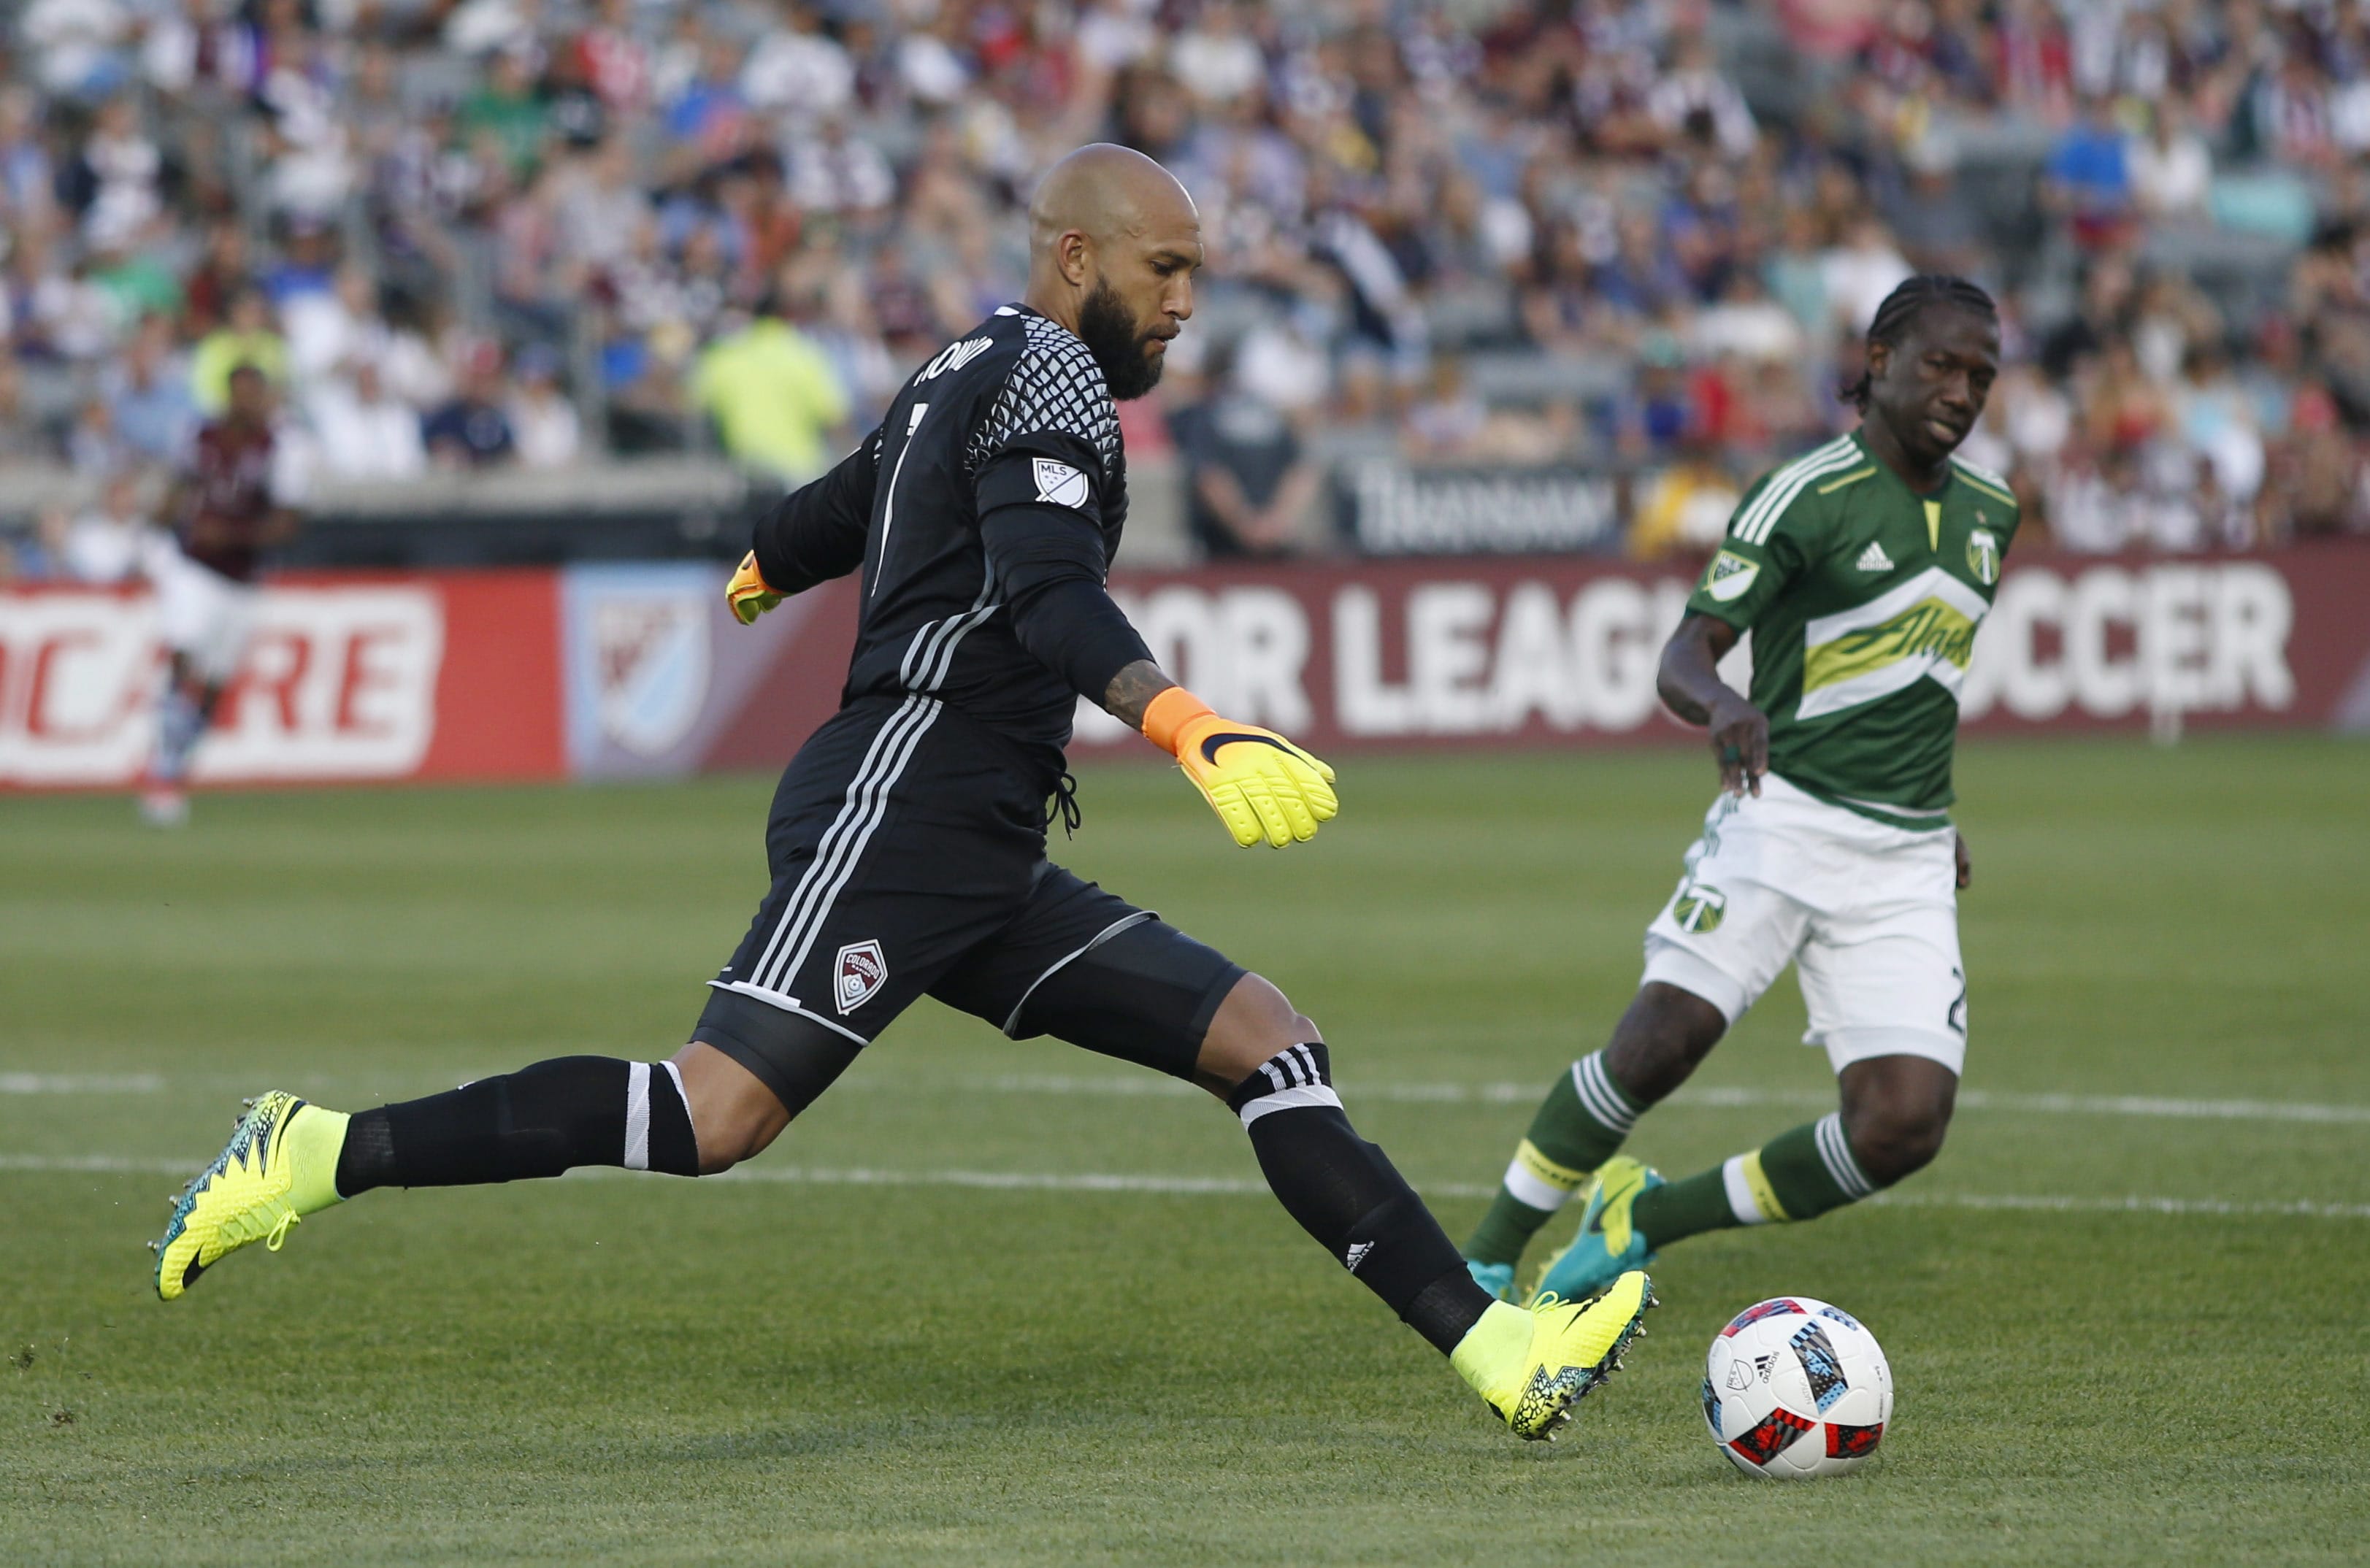 Colorado Rapids goalkeeper Tim Howard, front, clears the ball as Portland Timbers forward Diego Chara defends in the first half of an MLS soccer match Monday, July 4, 2016, in Commerce City, Colo.